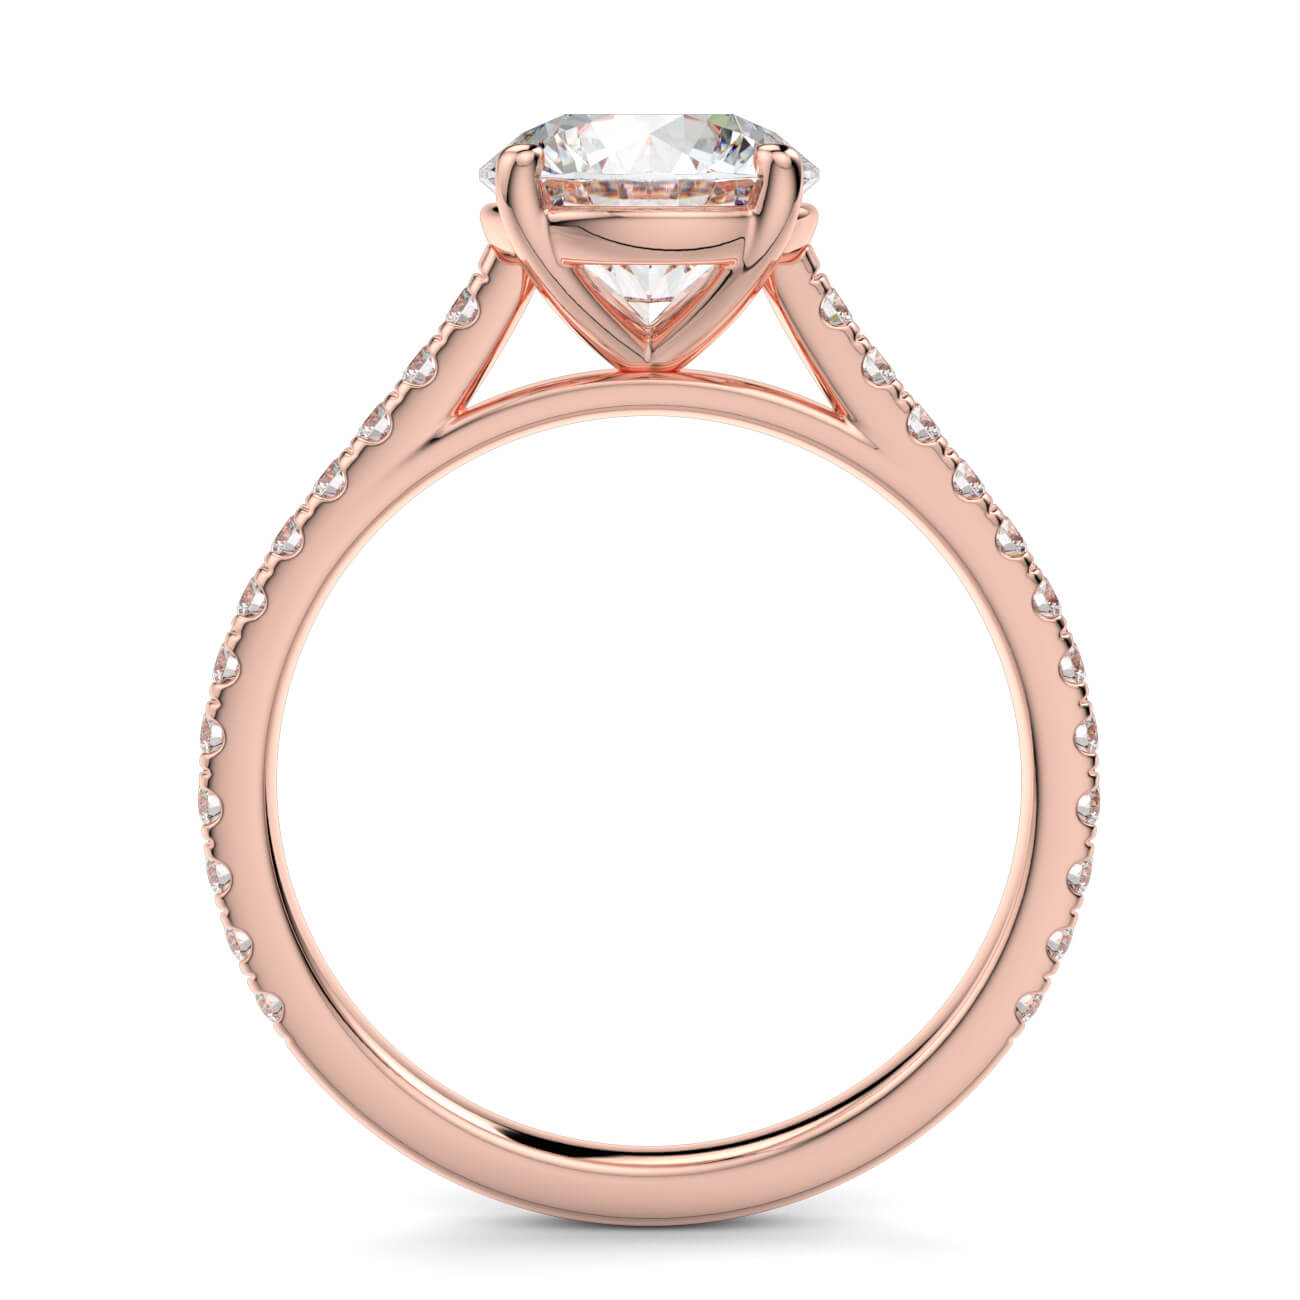 Classic cathedral diamond engagement ring in rose gold – Australian Diamond Network